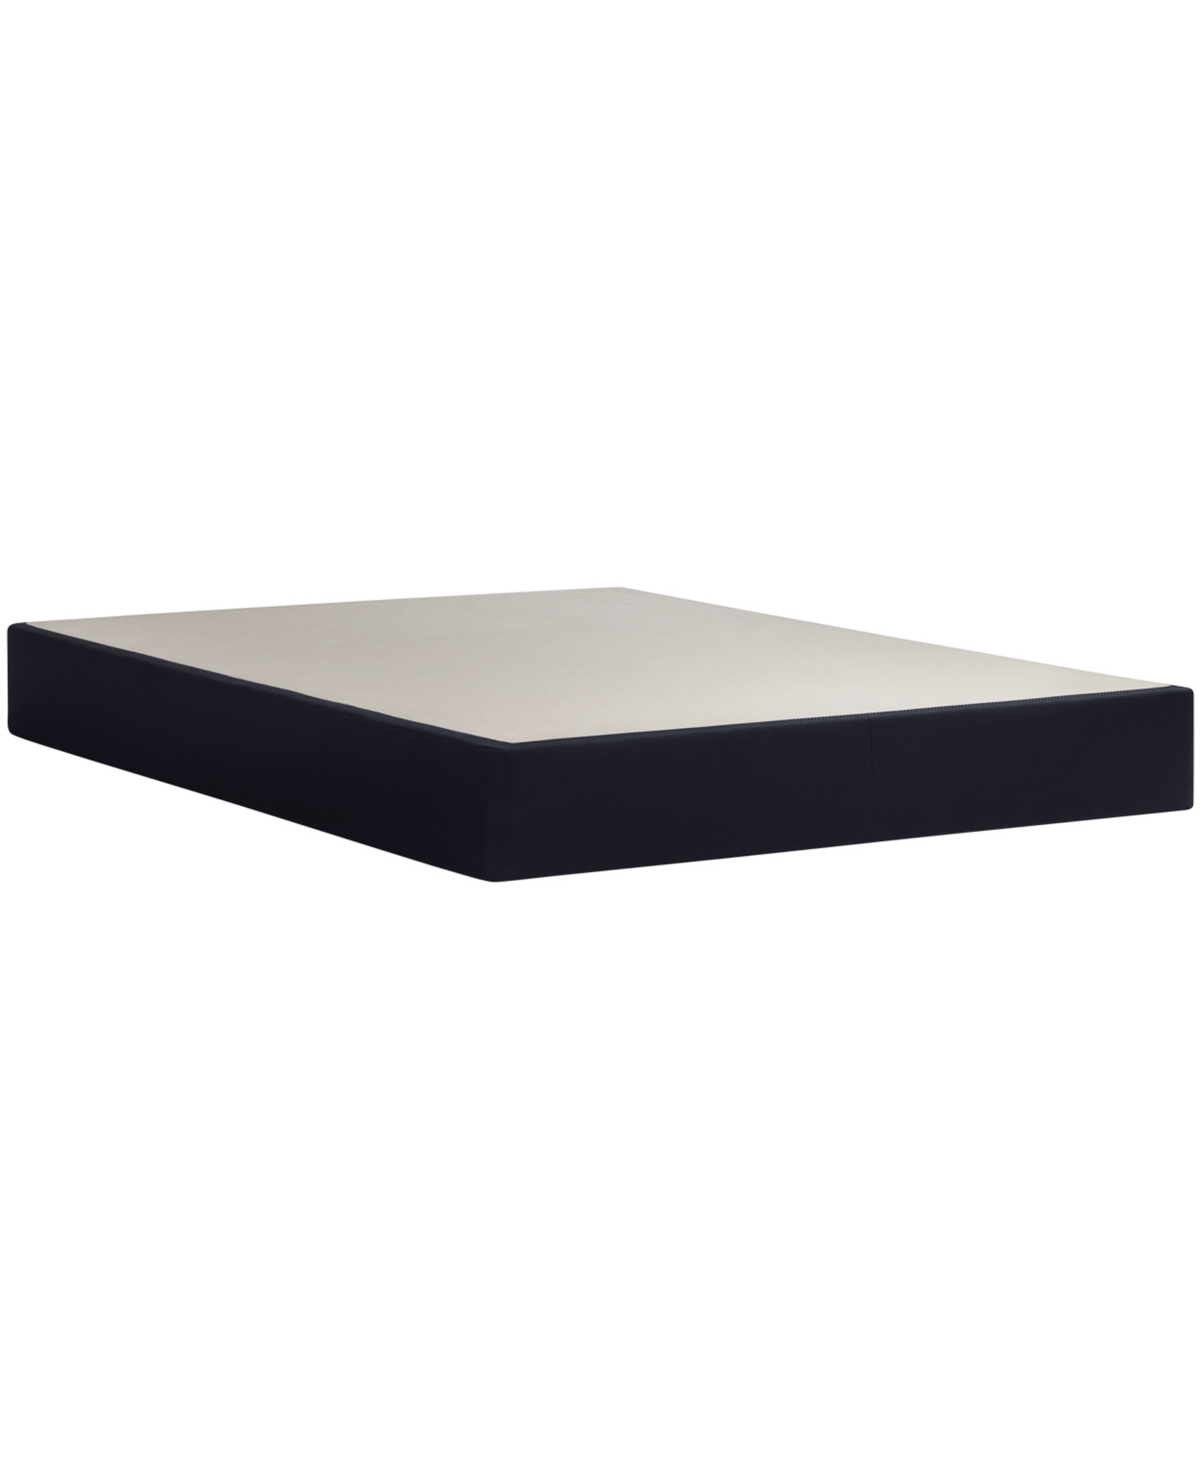 Stearns & Foster Standard Profile Box Spring - Queen Split In No Color